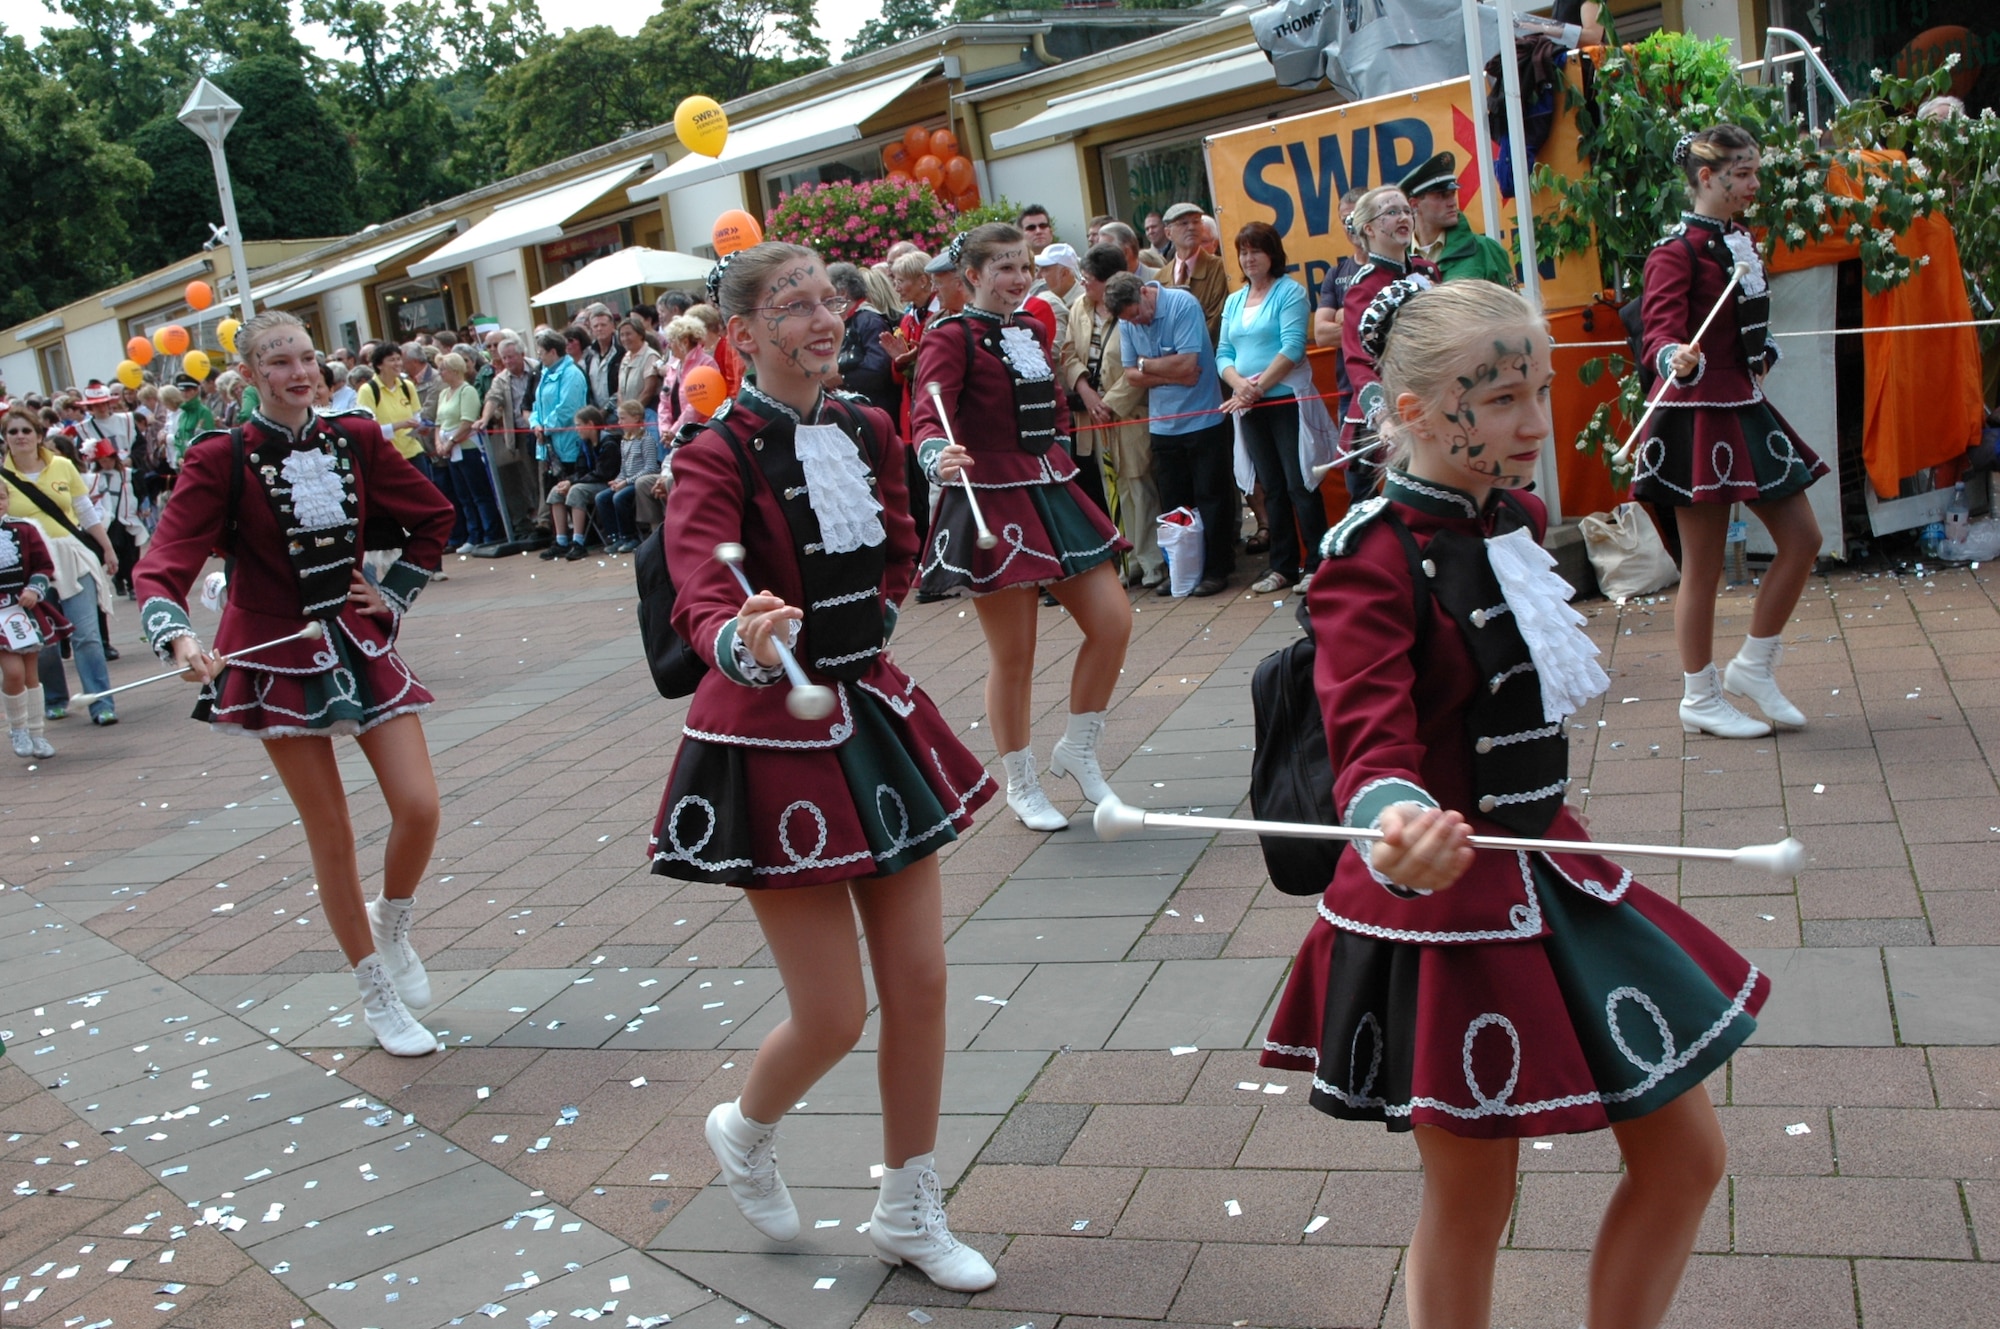 SPANGDAHLEM AIR BASE, Germany -- A group of local cheerleaders walk in a previous Rheinland-Pfalz Tag parade. This year’s parade, which is an event featuring 4,000 participants made up of 130 groups from all over the state, will take from 3-5 p.m. June 13. (U.S. Air Force photo/Iris Reiff)